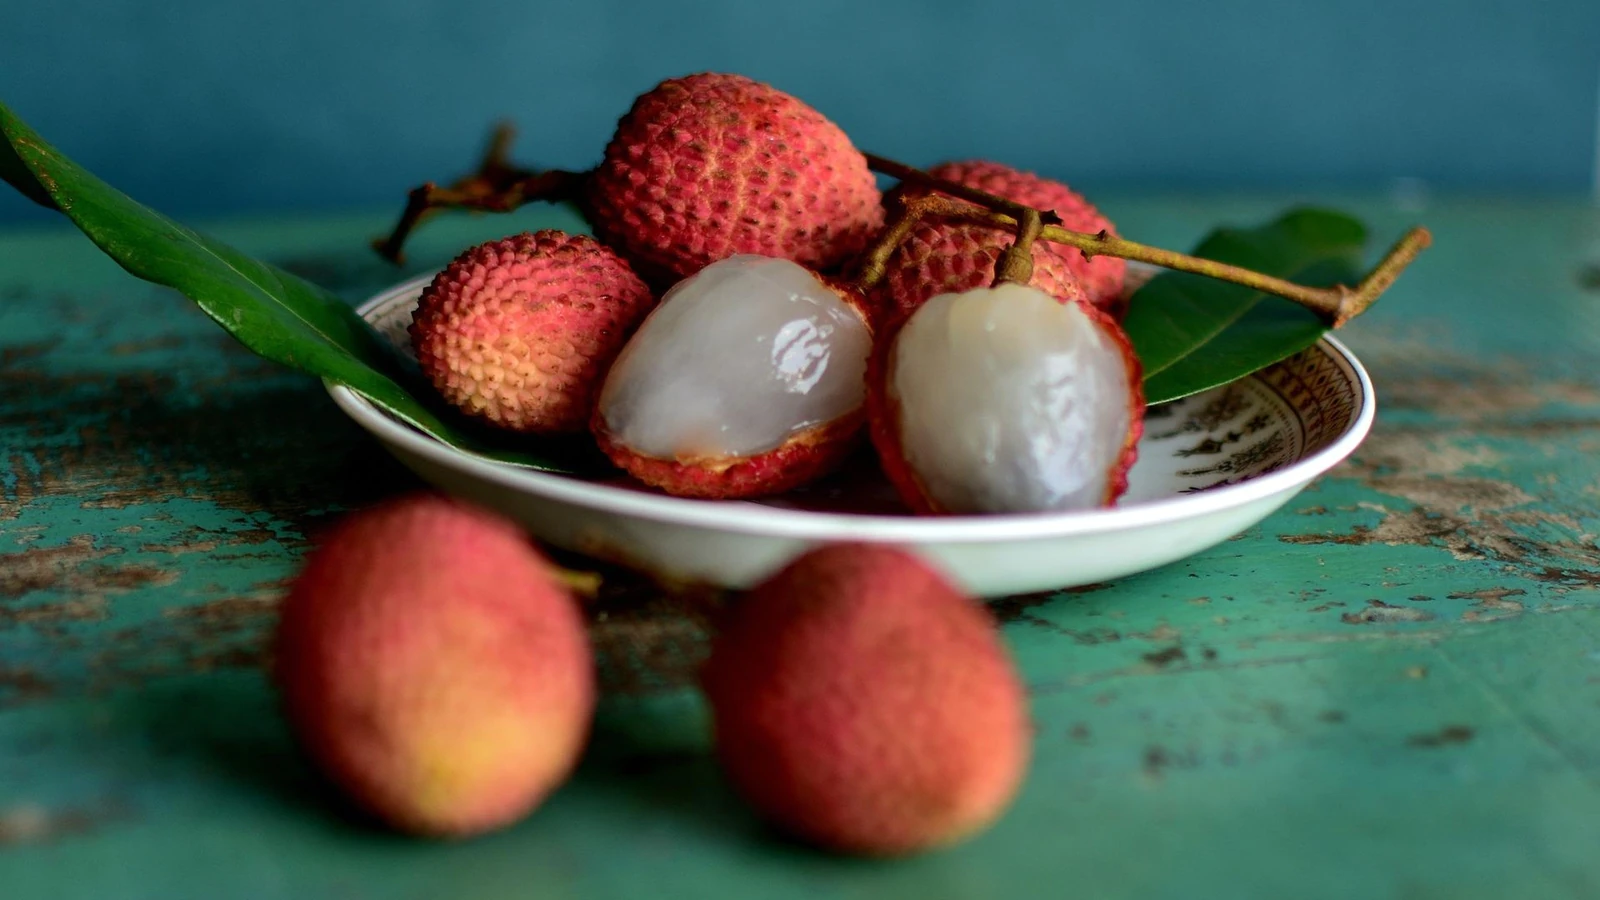 Lychee skincare tips: Add litchi fruit to your beauty, diet for these benefits